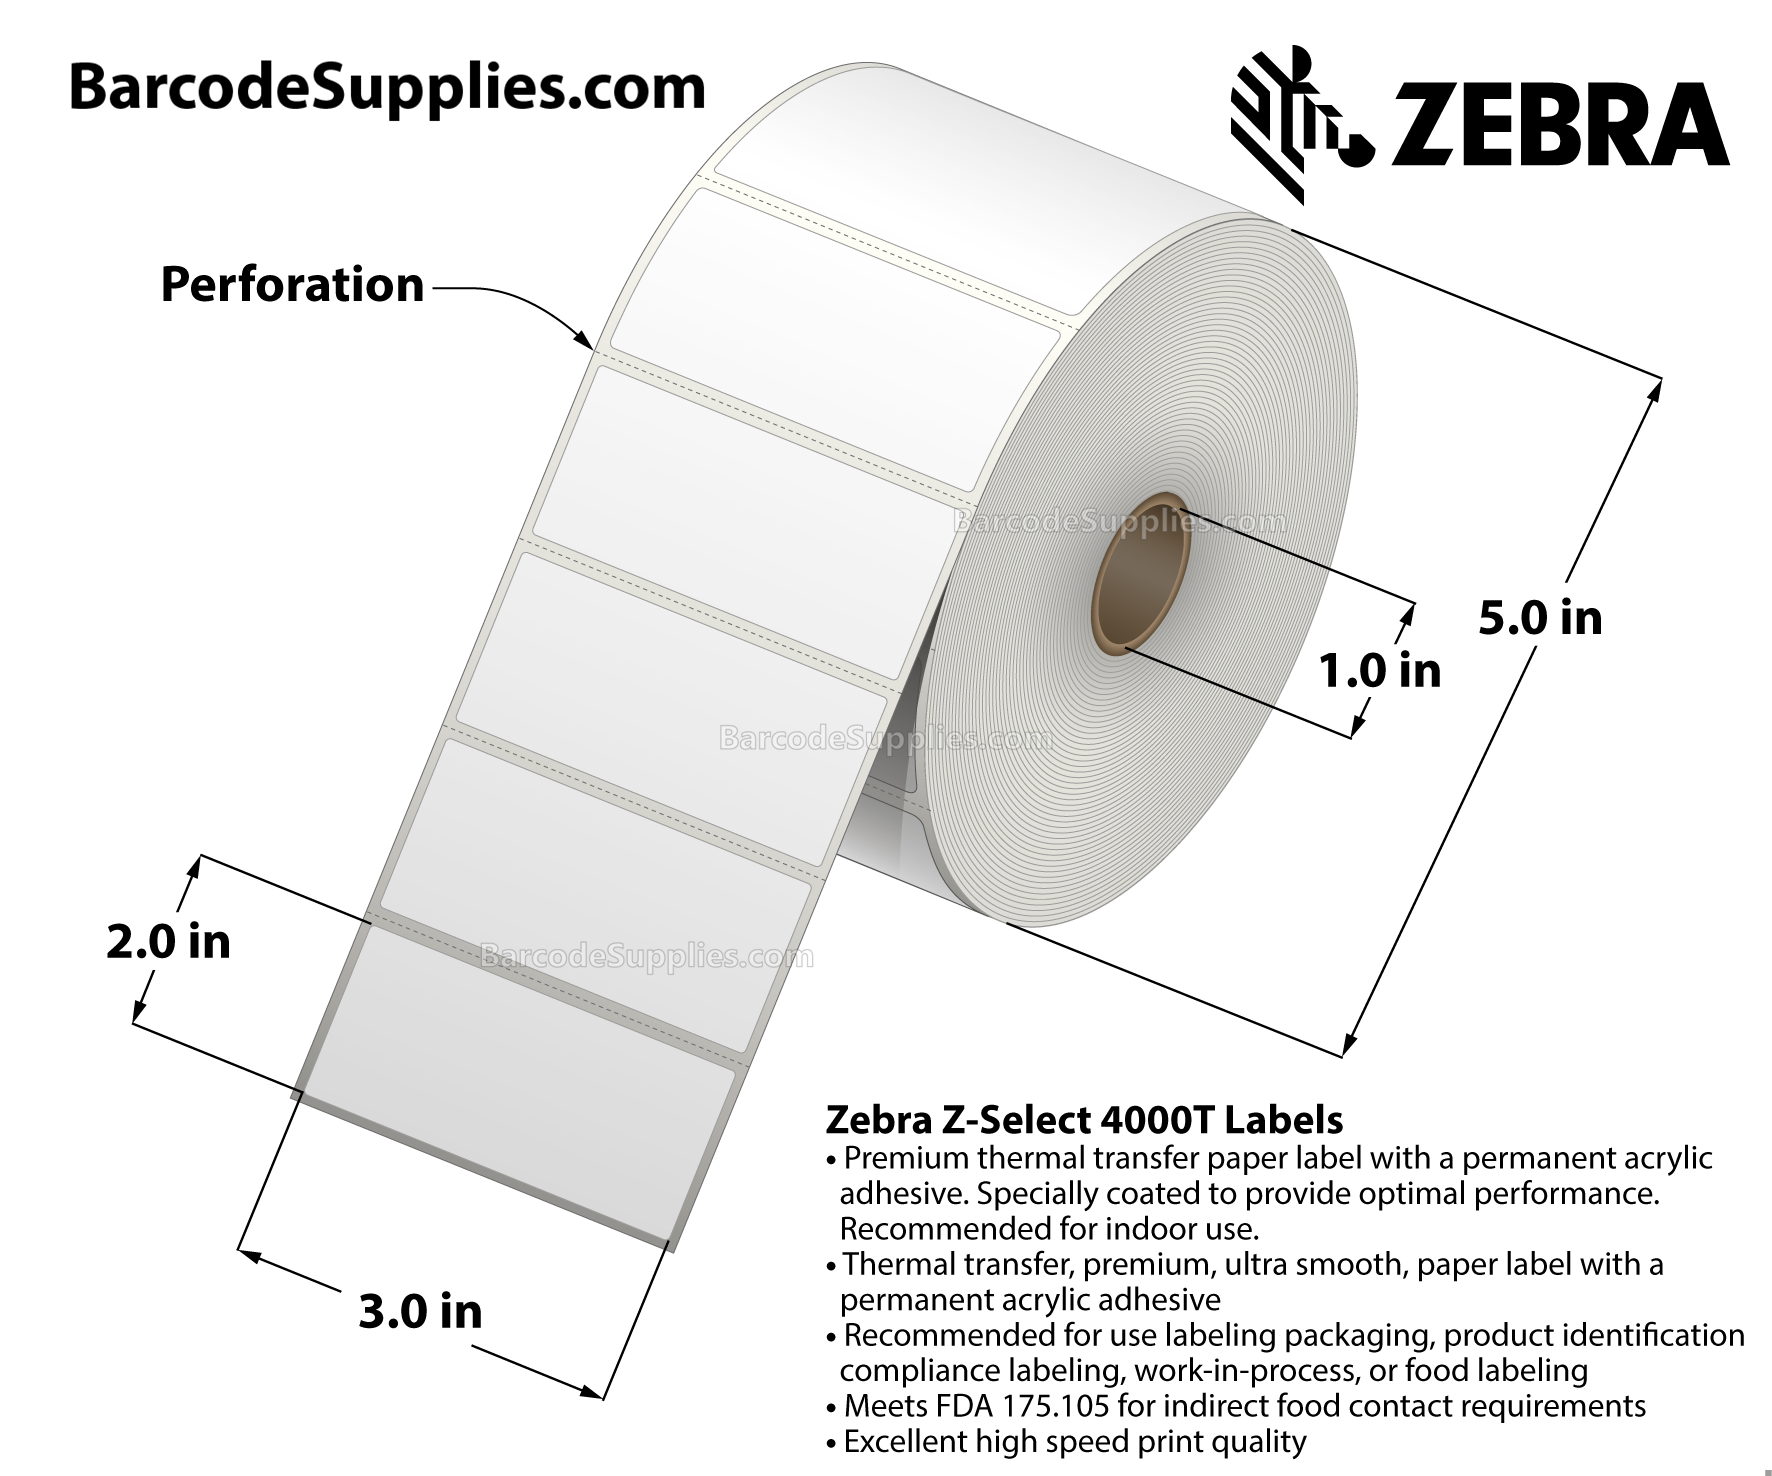 3 x 2 Thermal Transfer White Z-Select 4000T Labels With Permanent Adhesive - Perforated - 1370 Labels Per Roll - Carton Of 6 Rolls - 8220 Labels Total - MPN: 10009529